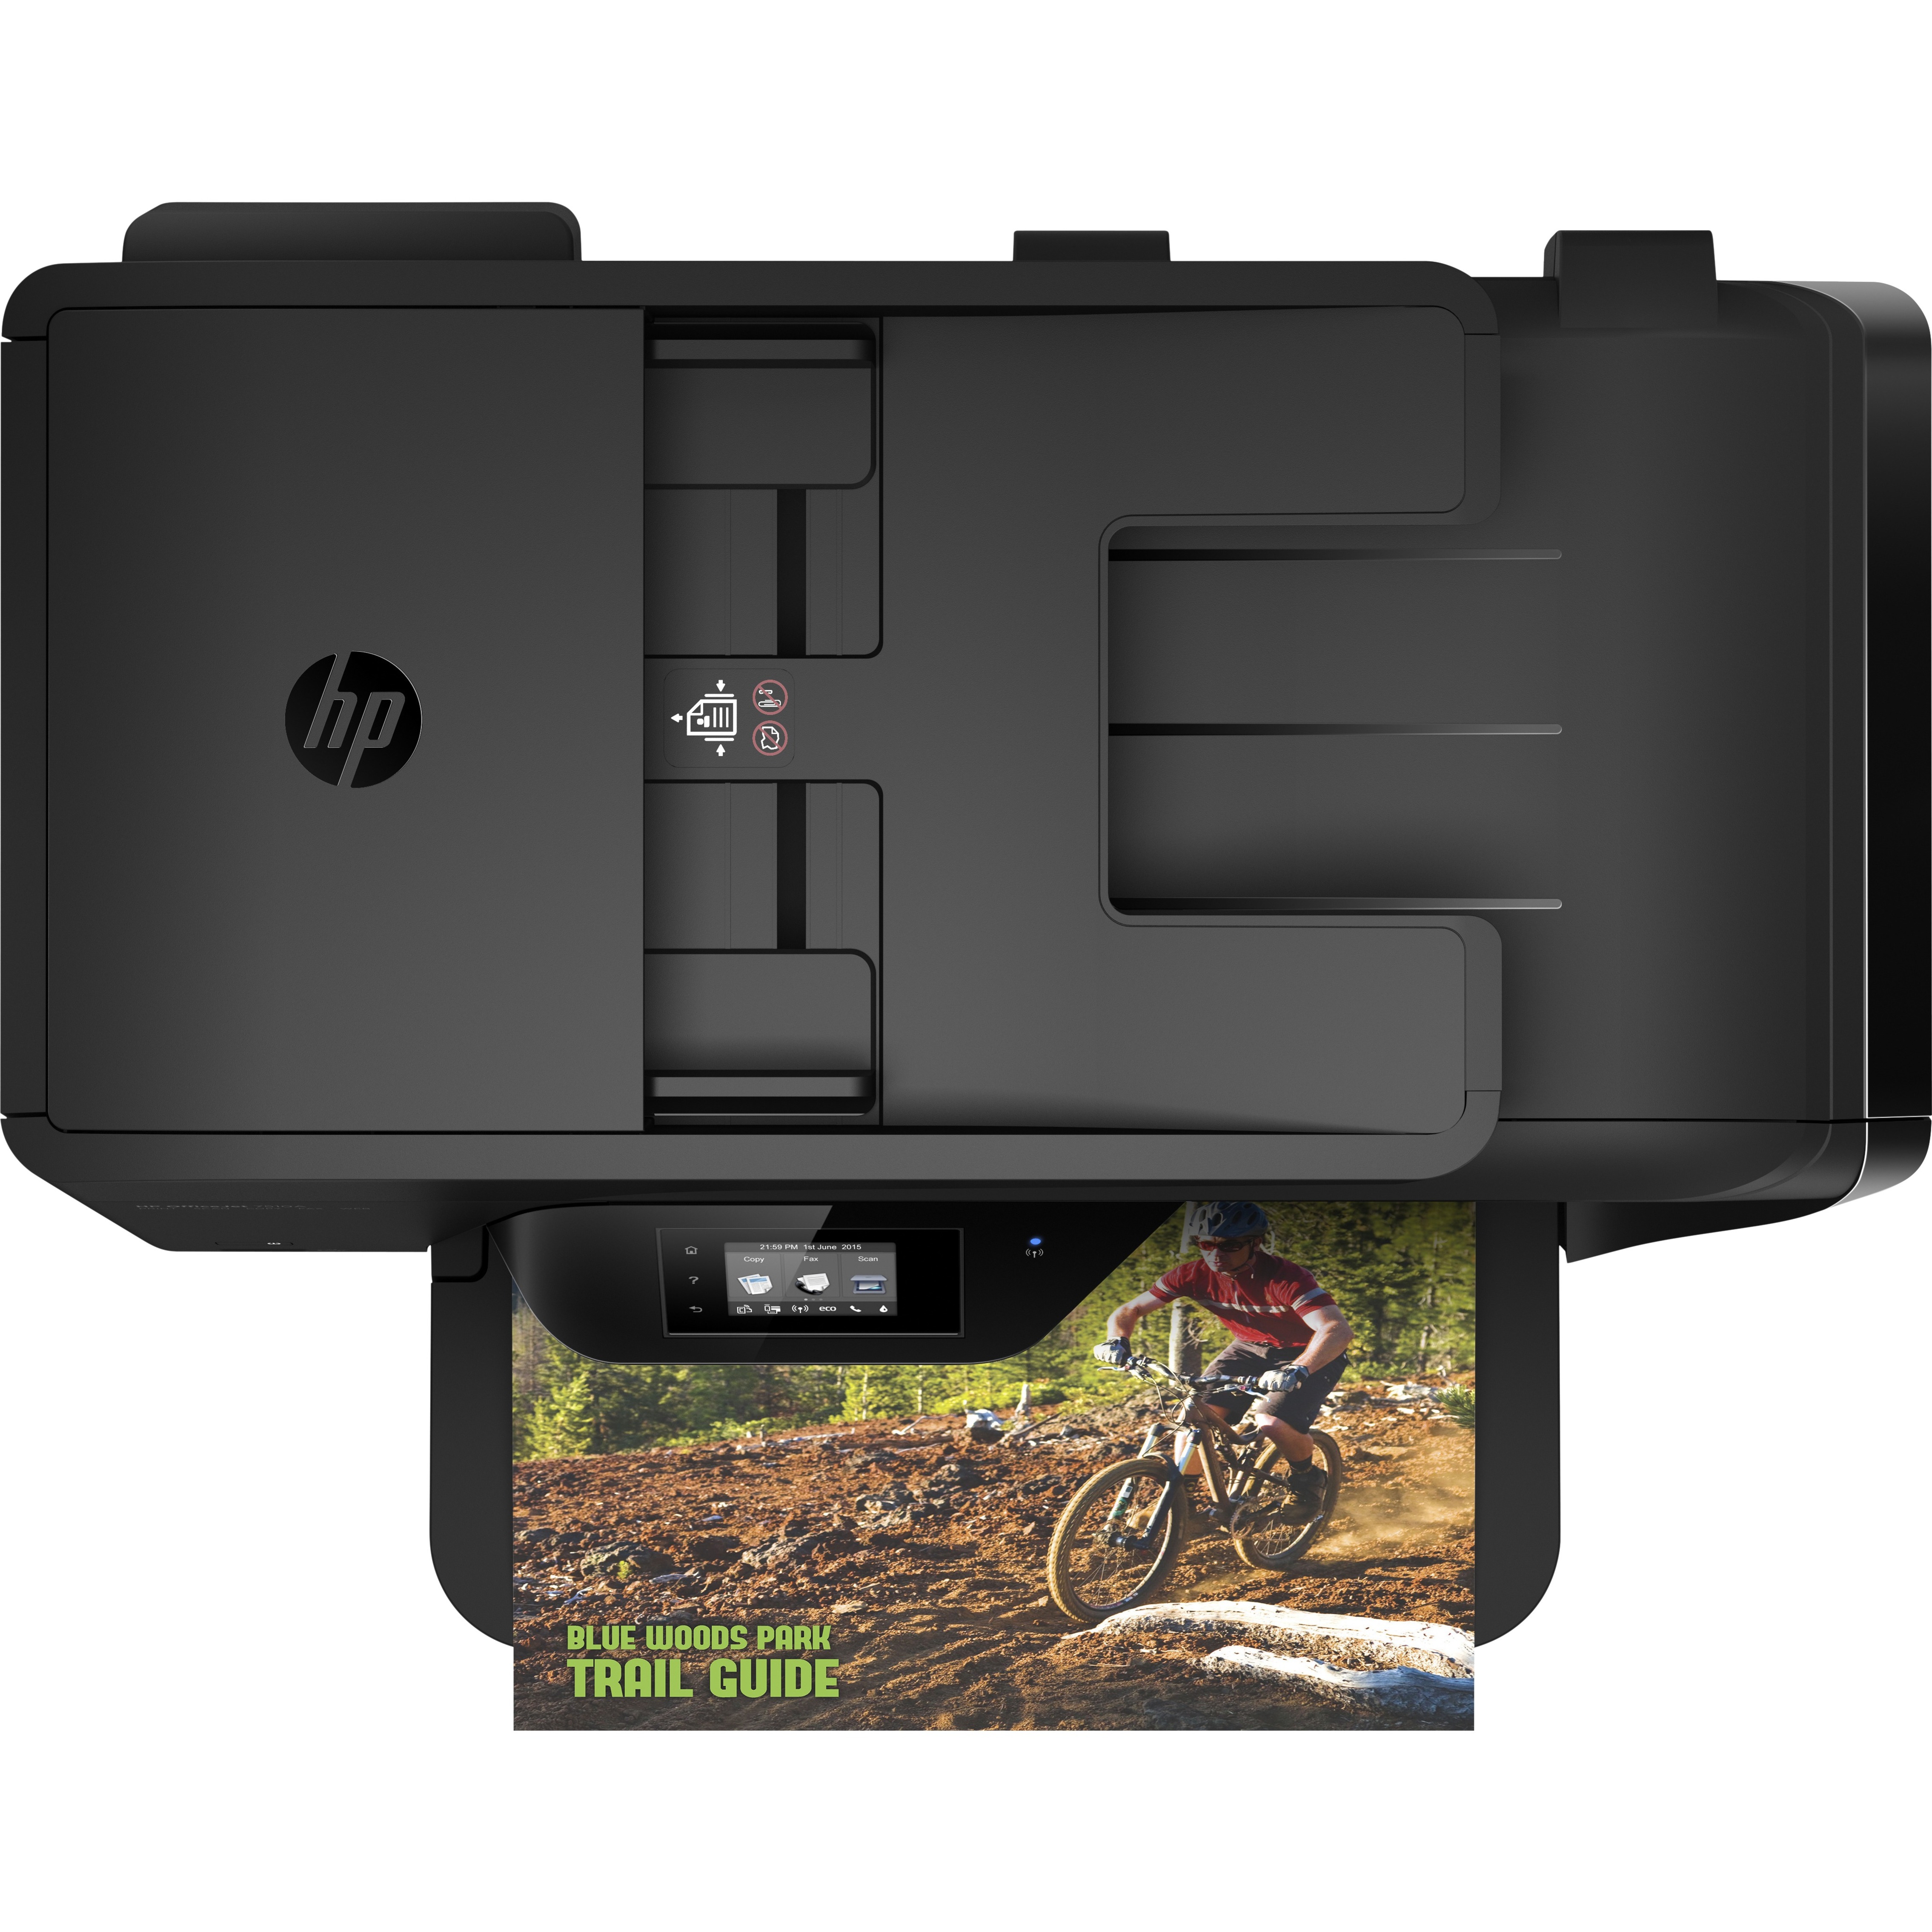 HP Officejet 7510 Wide Format All-in-One - multifunction printer (color) - image 6 of 7